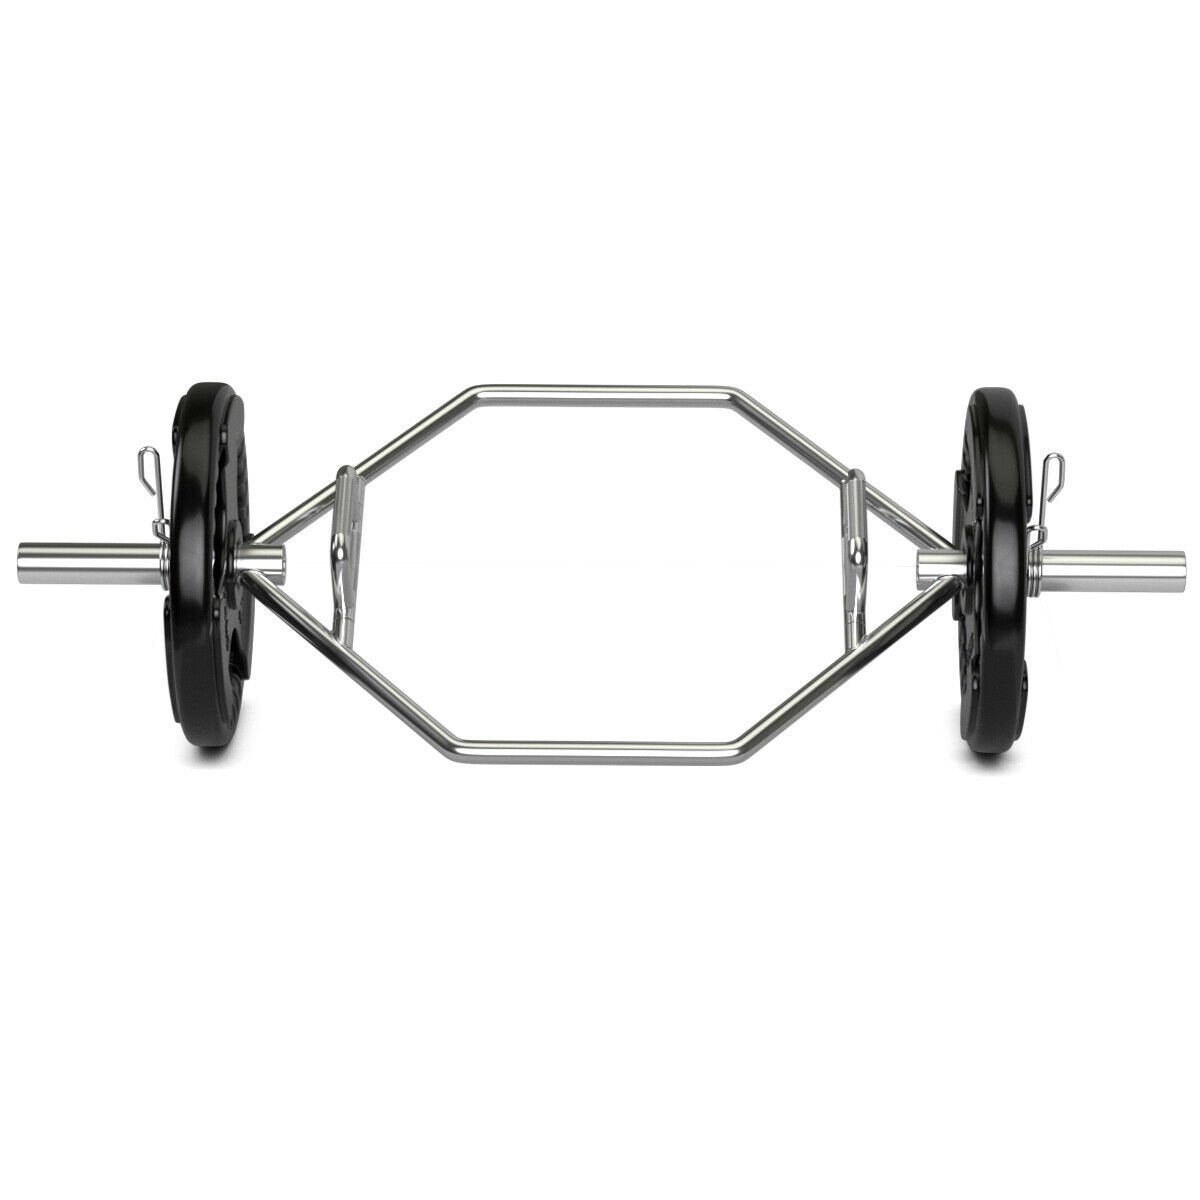 56 Inch Olympic Hexagon Deadlift Trap Bar with Folding Grips Powerlifting, Silver - Gallery Canada